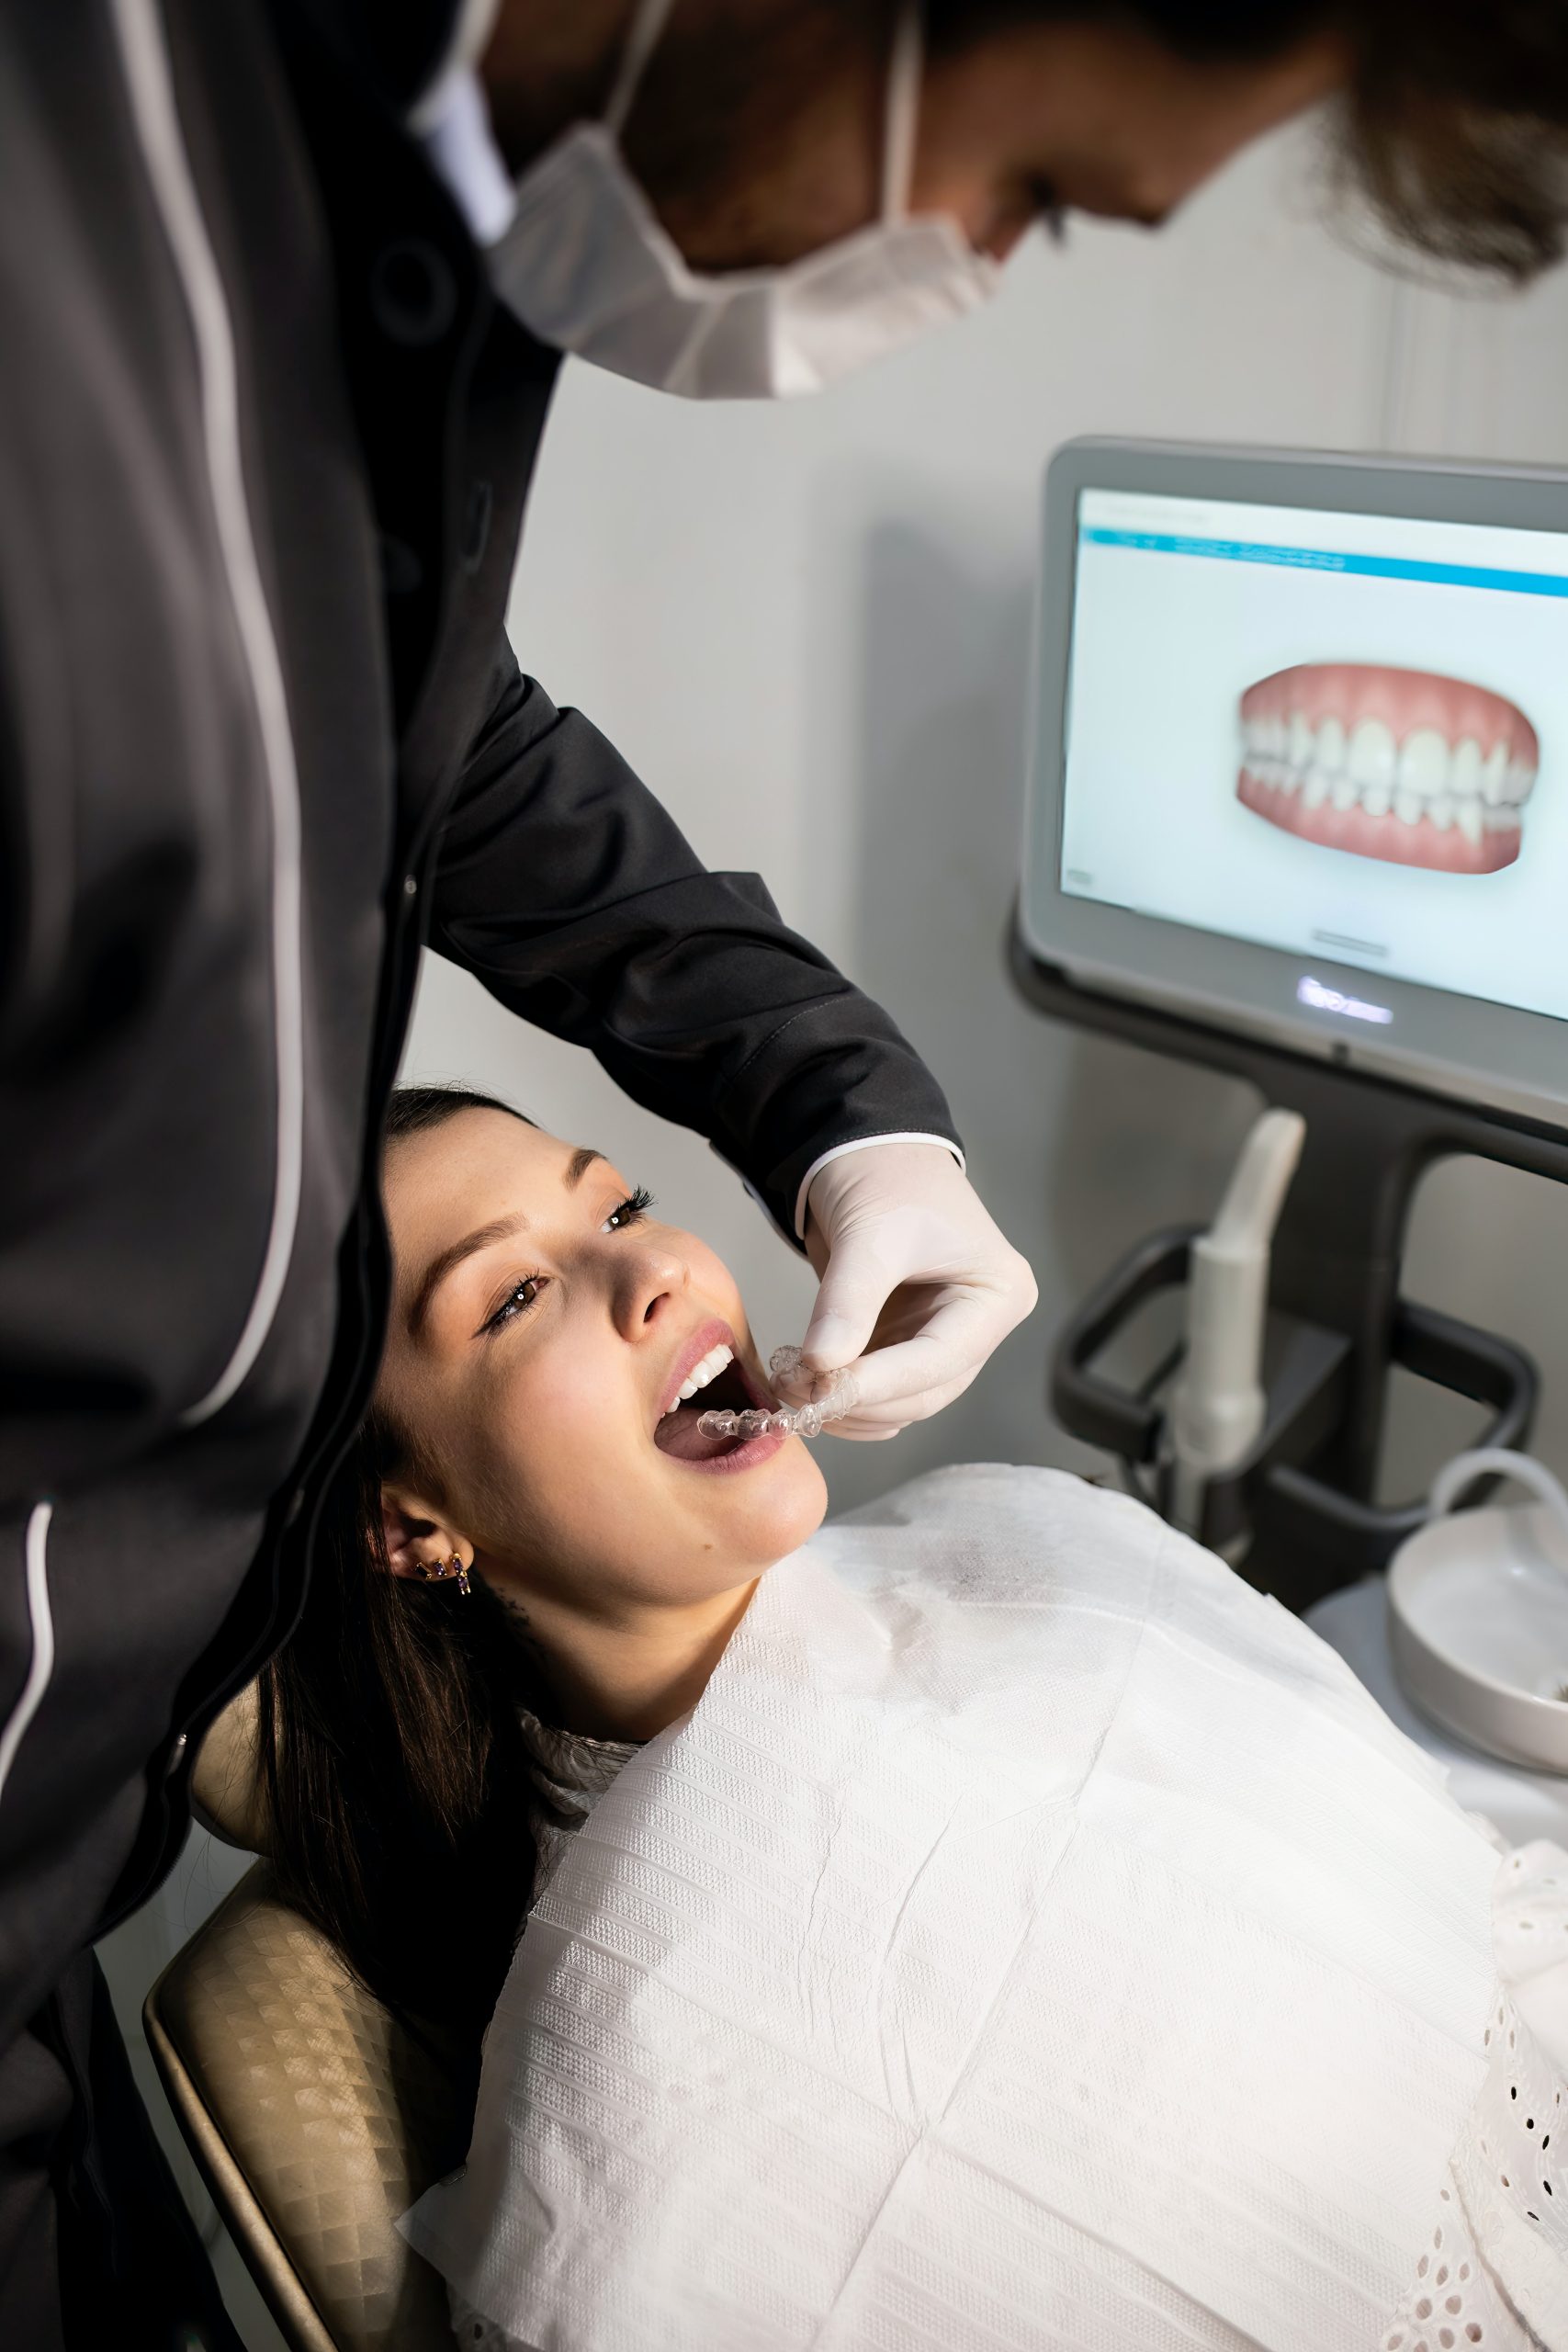 When Is It Time To Get Dental Implants?